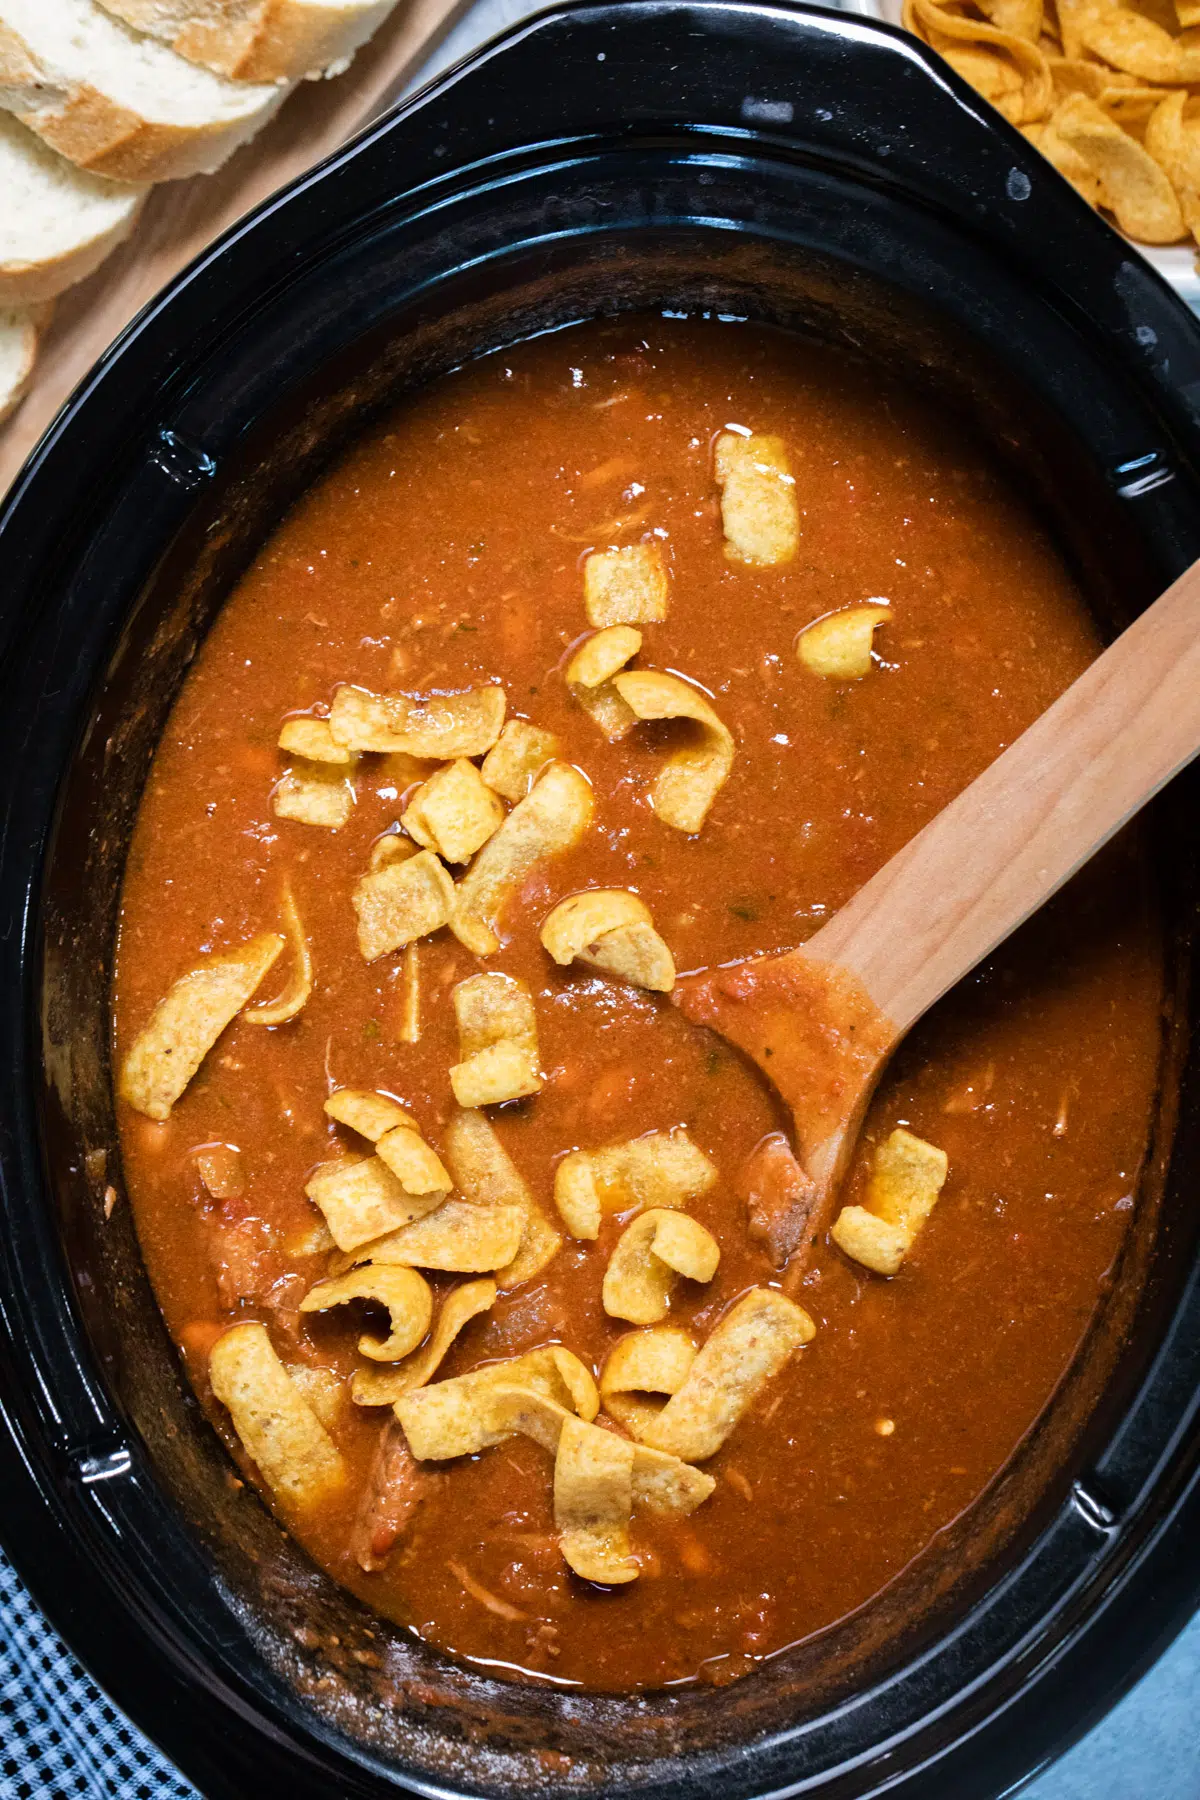 A tantalizing crock pot full of flavorful Mexican stew and tortilla chips.